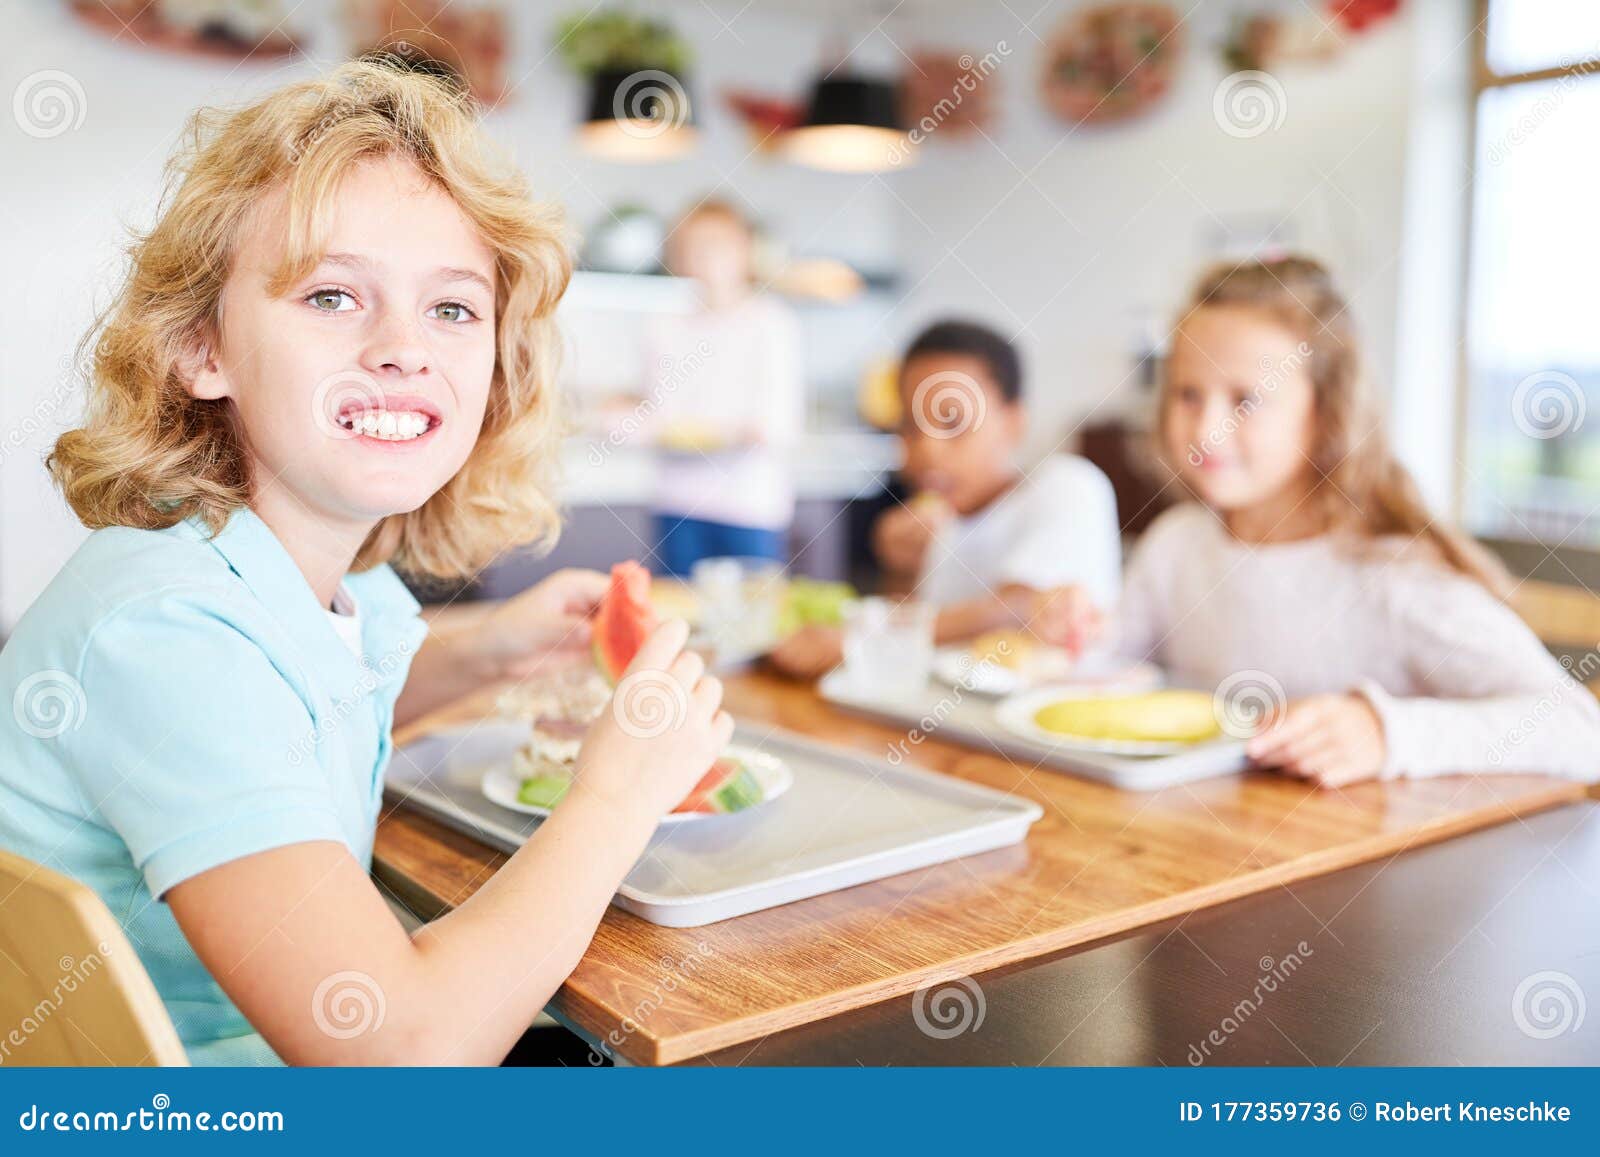 https://thumbs.dreamstime.com/z/children-eat-lunch-primary-school-canteen-happy-have-together-177359736.jpg